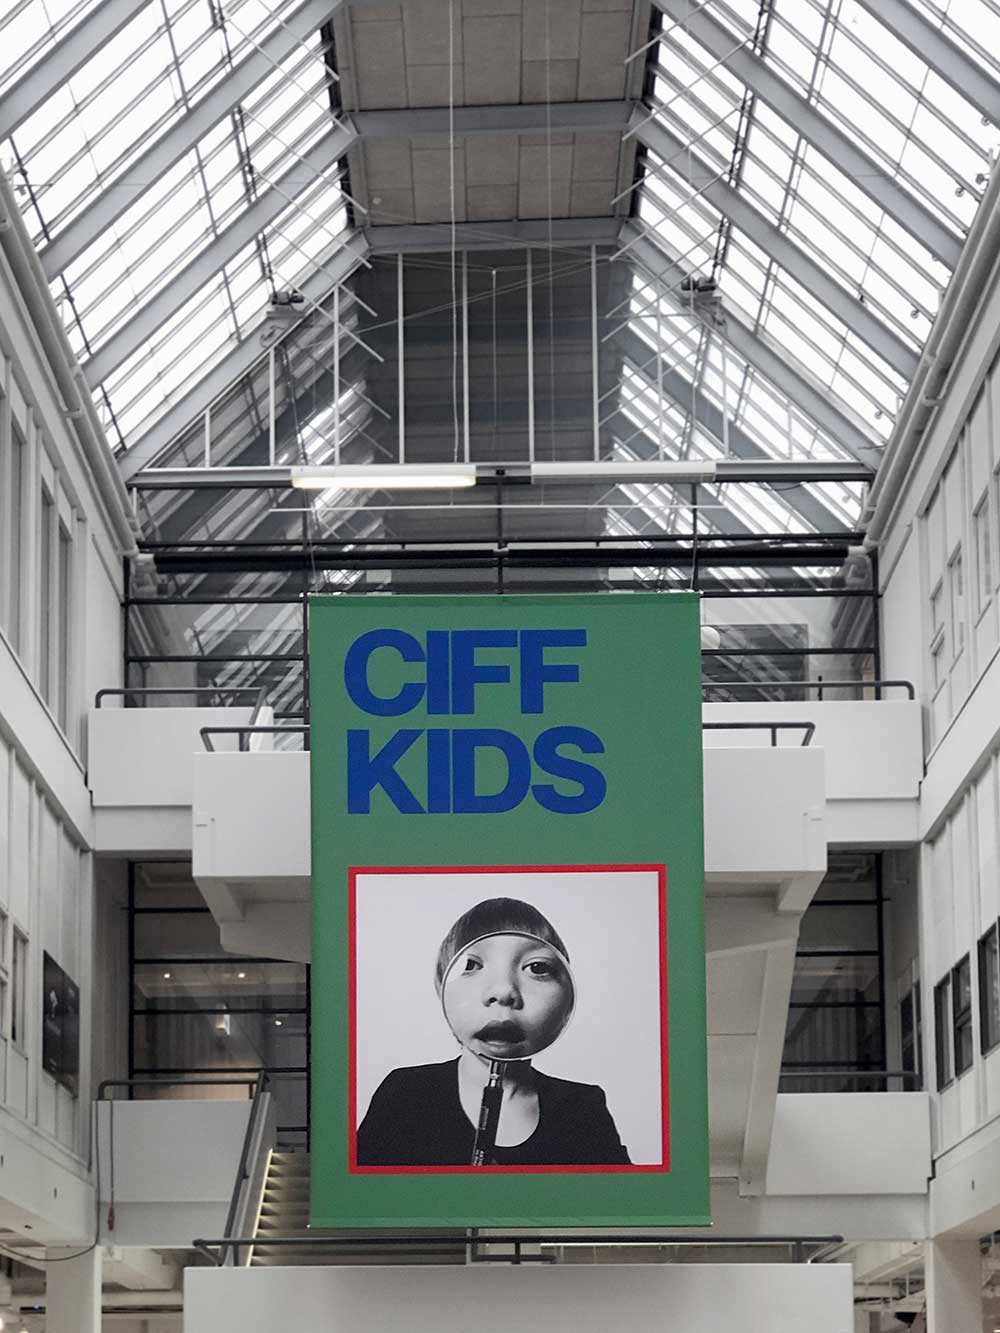 CIFF Kids Banner hanging from the celling